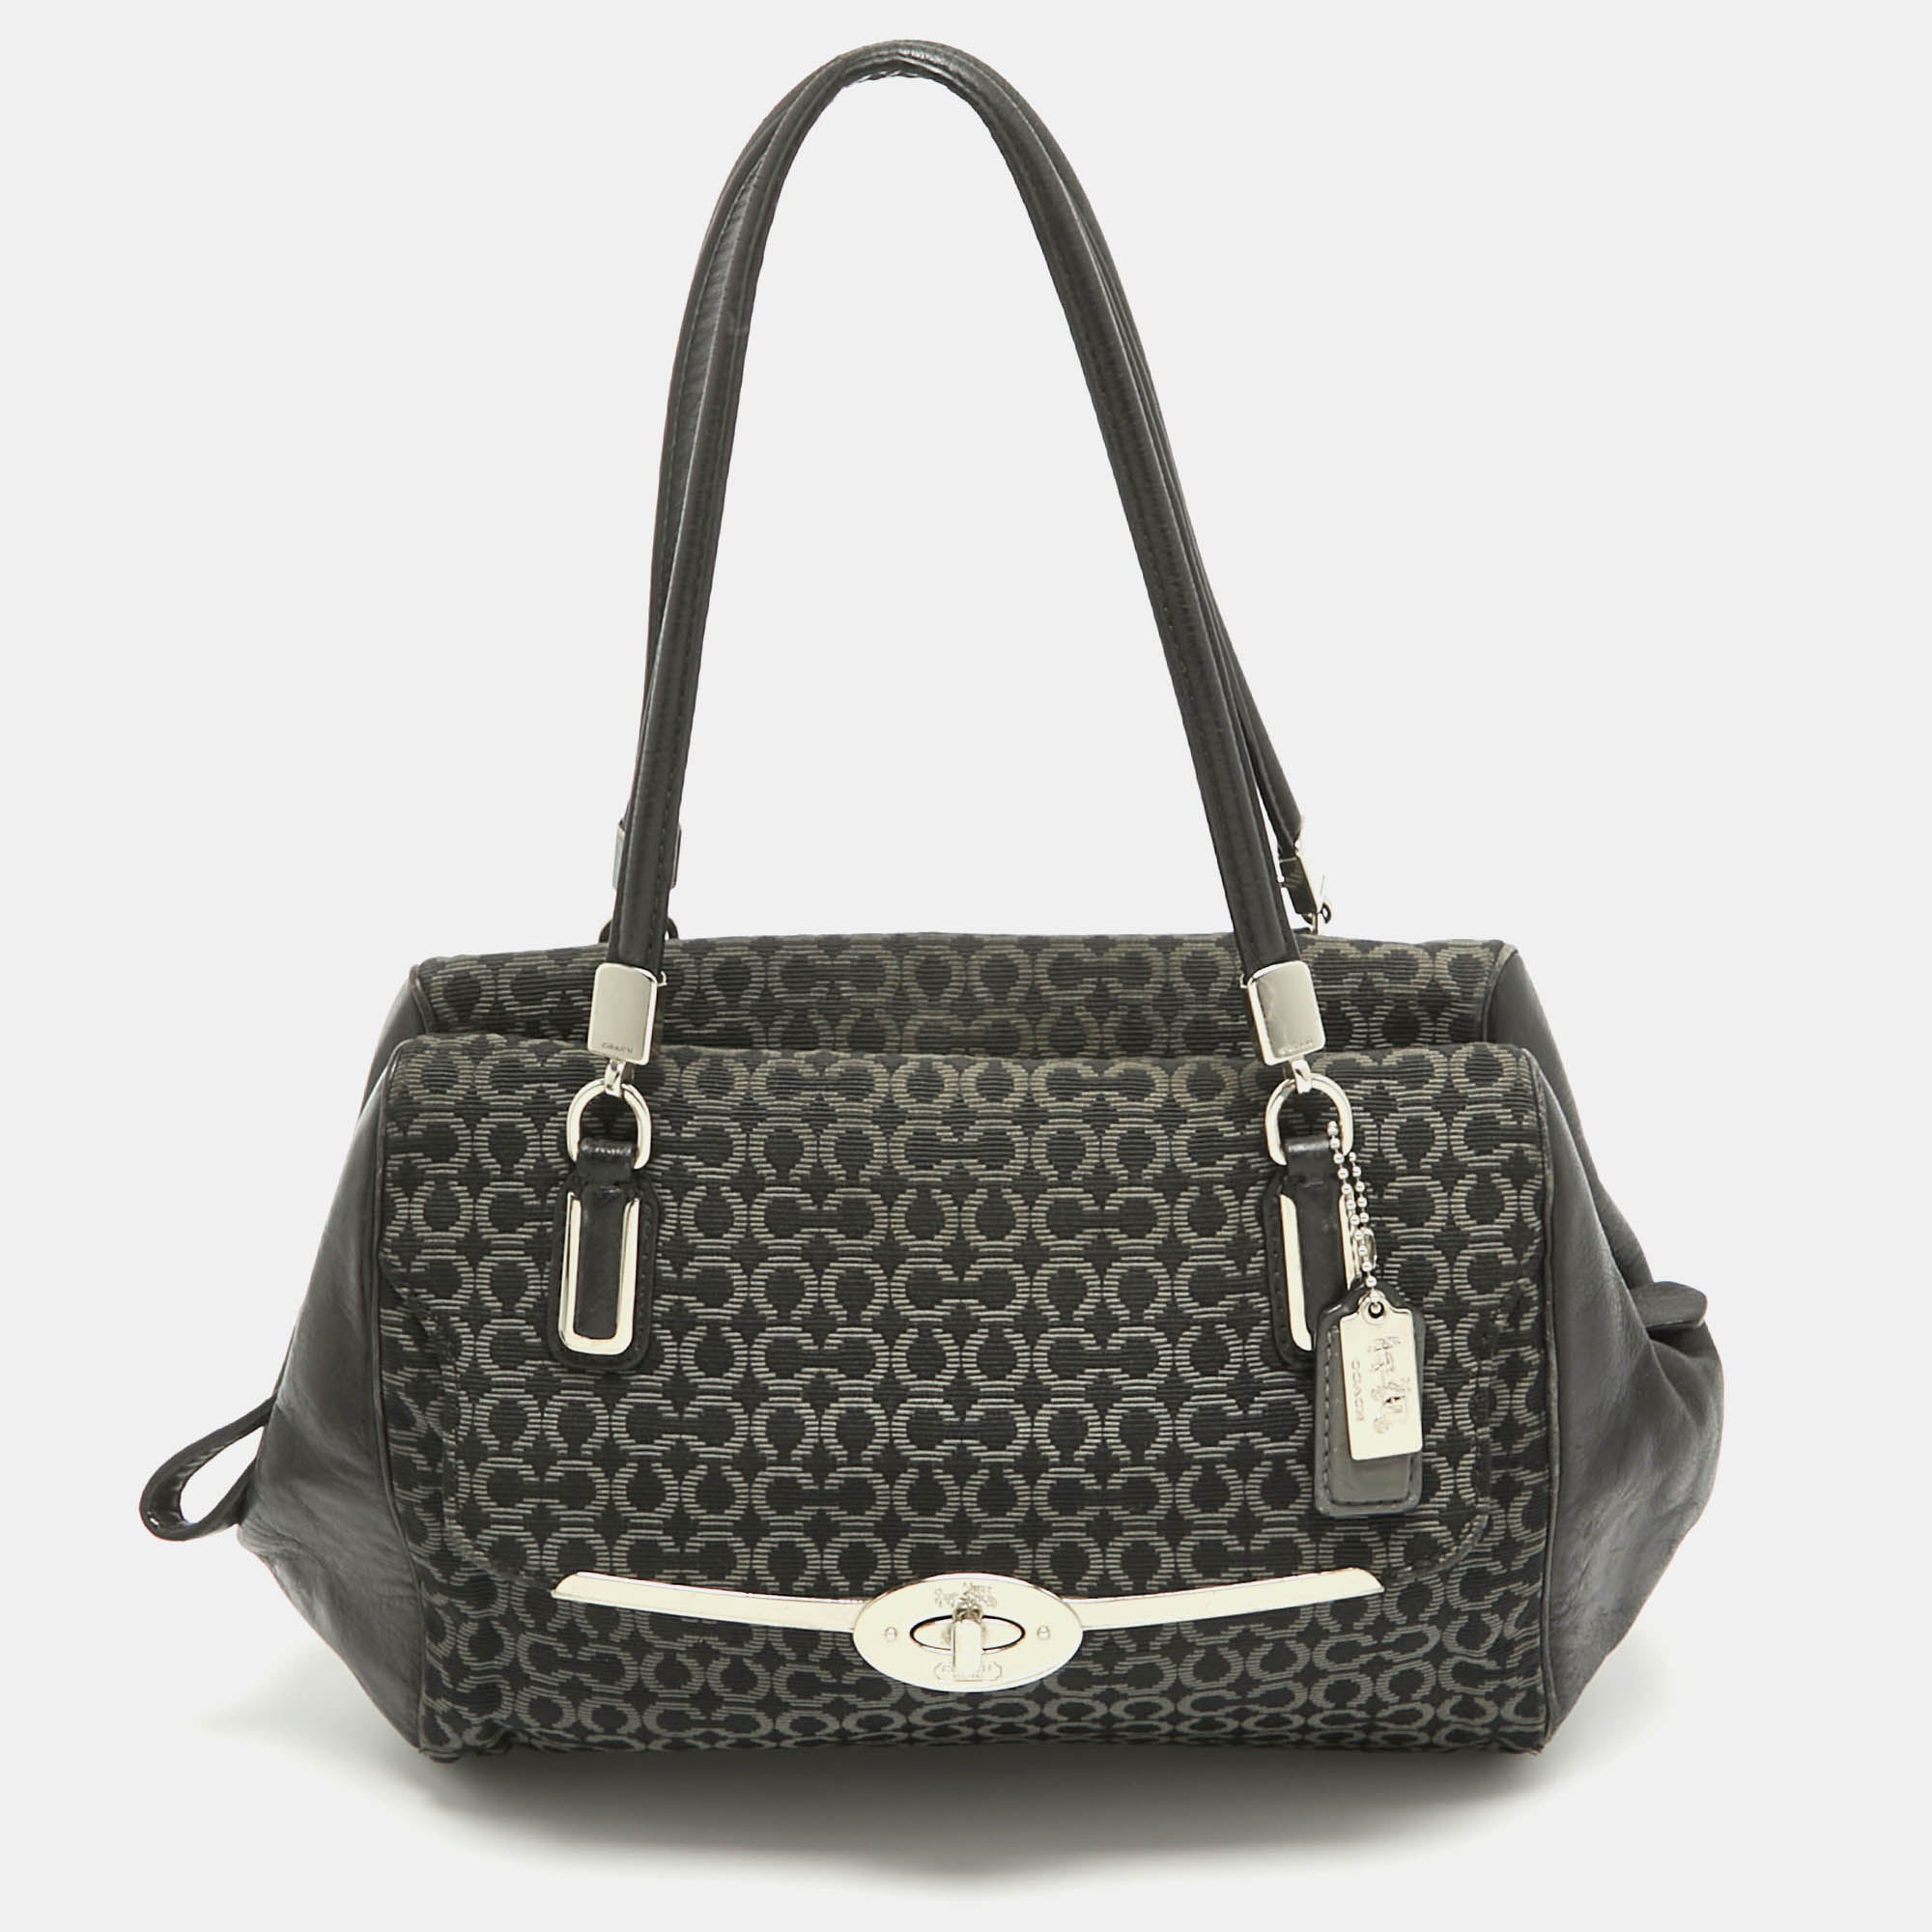 Coach black op art fabric and leather madison madeline satchel